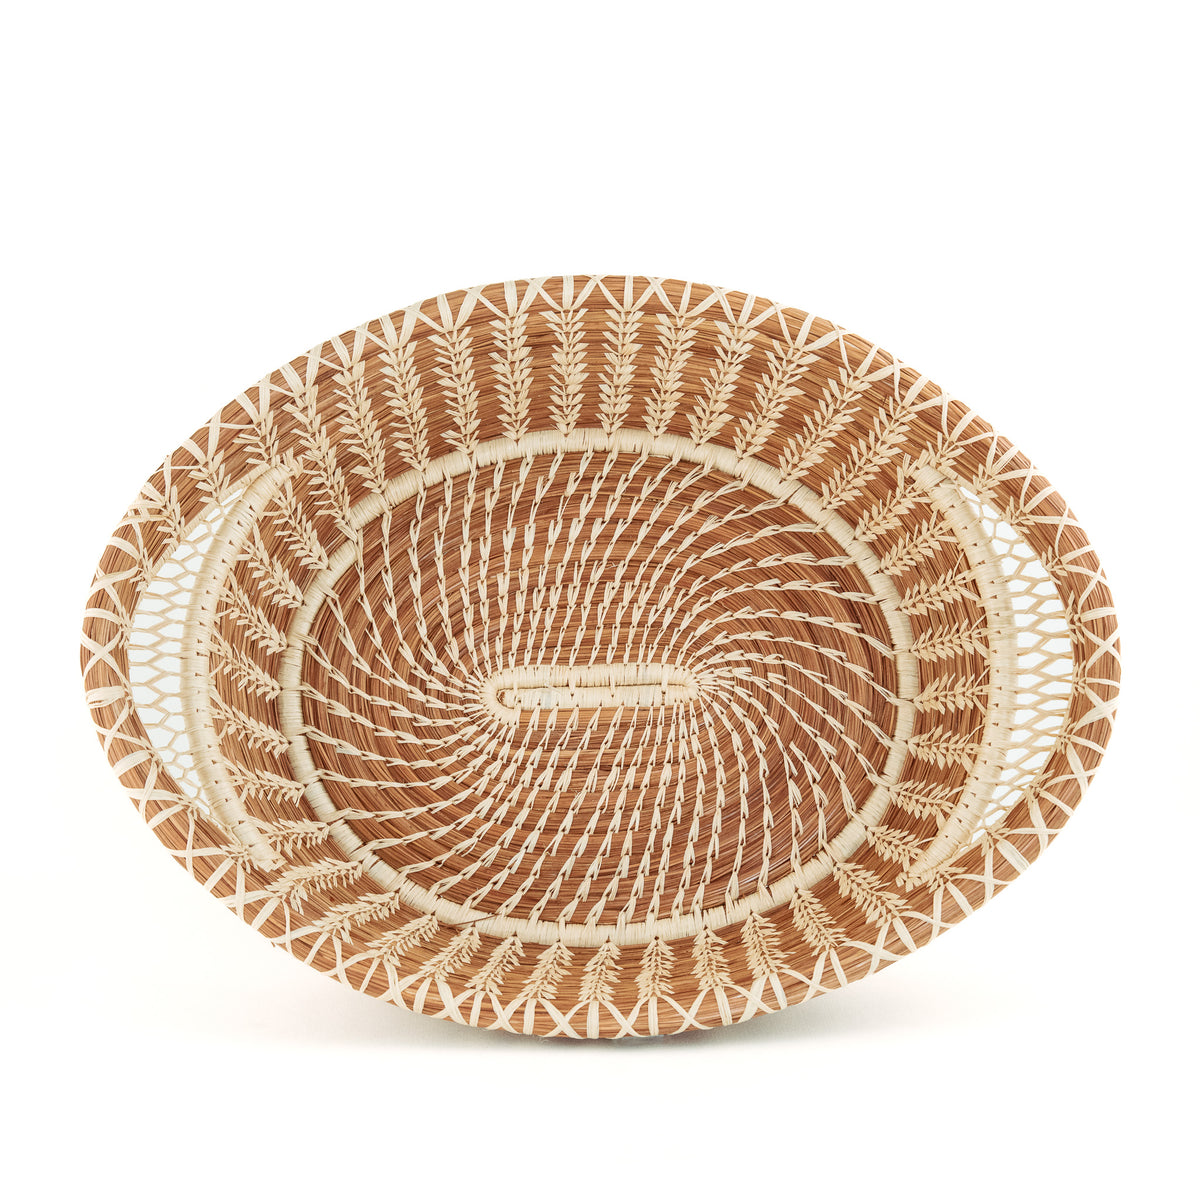 Large Pine Needle Basket with Lacy Handles top view